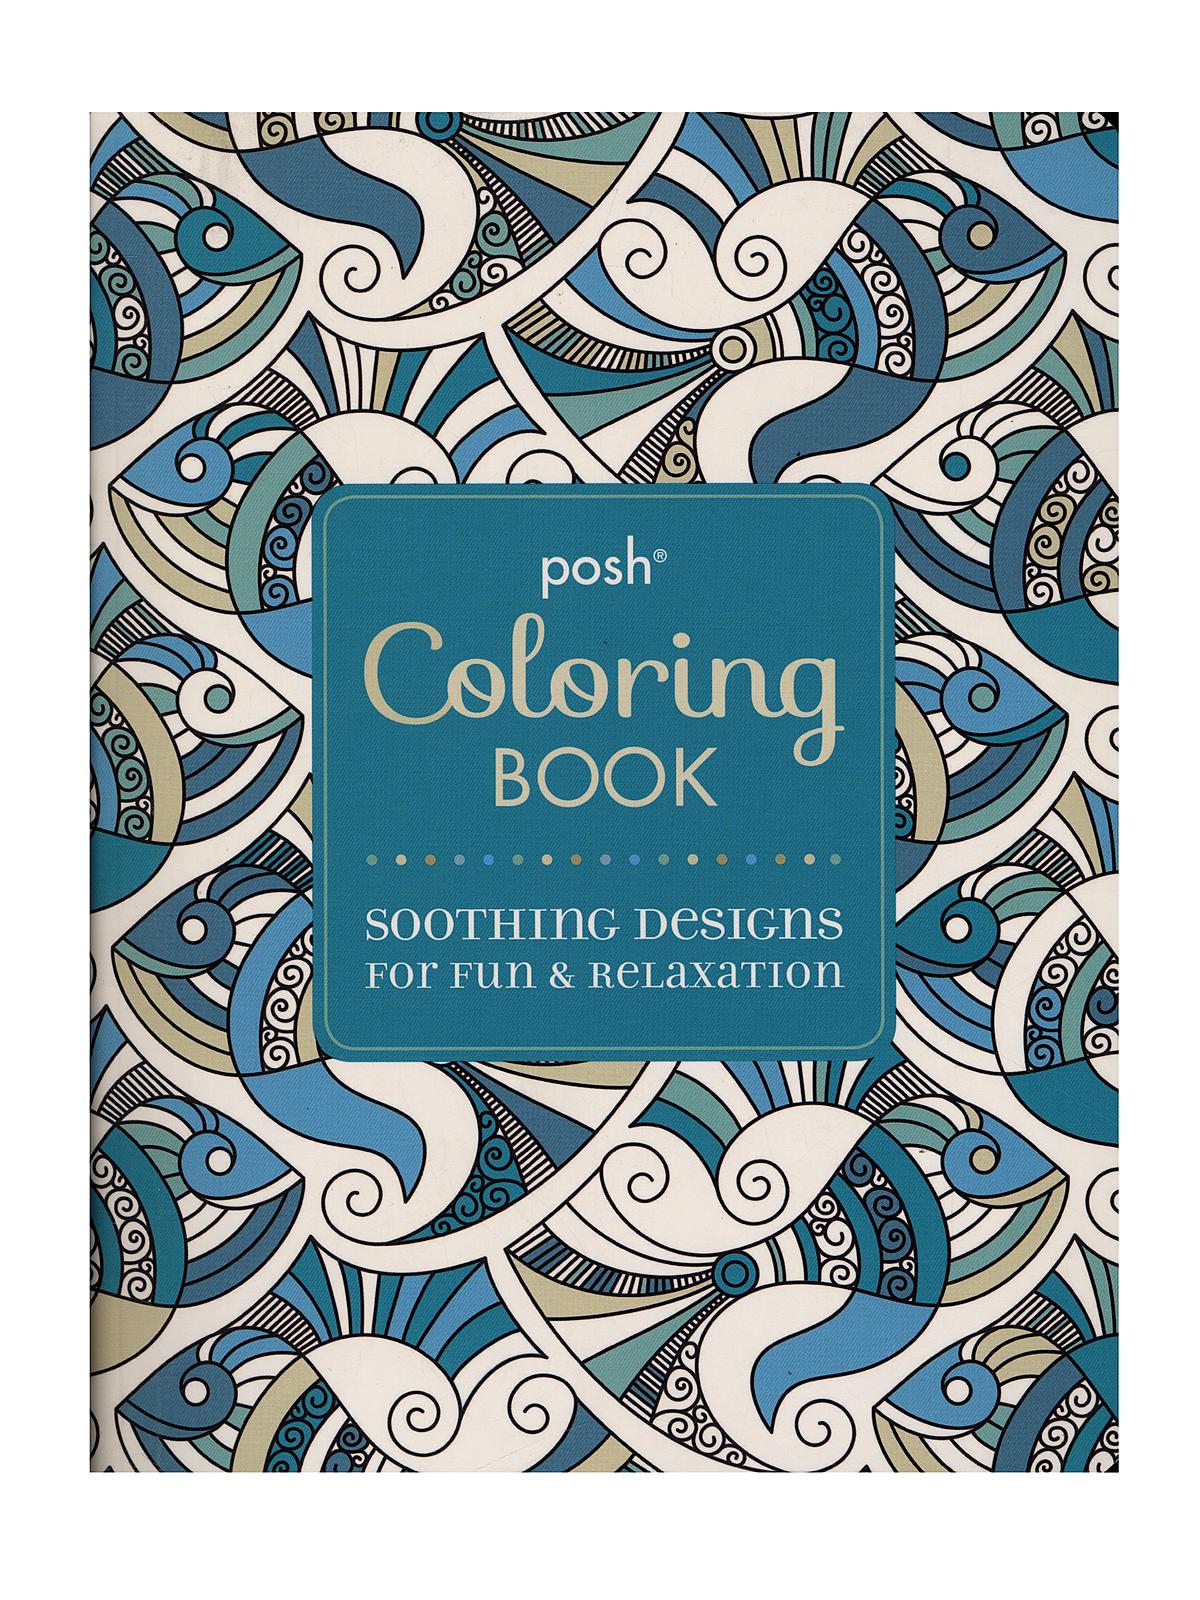 Posh Coloring Books Soothing Designs